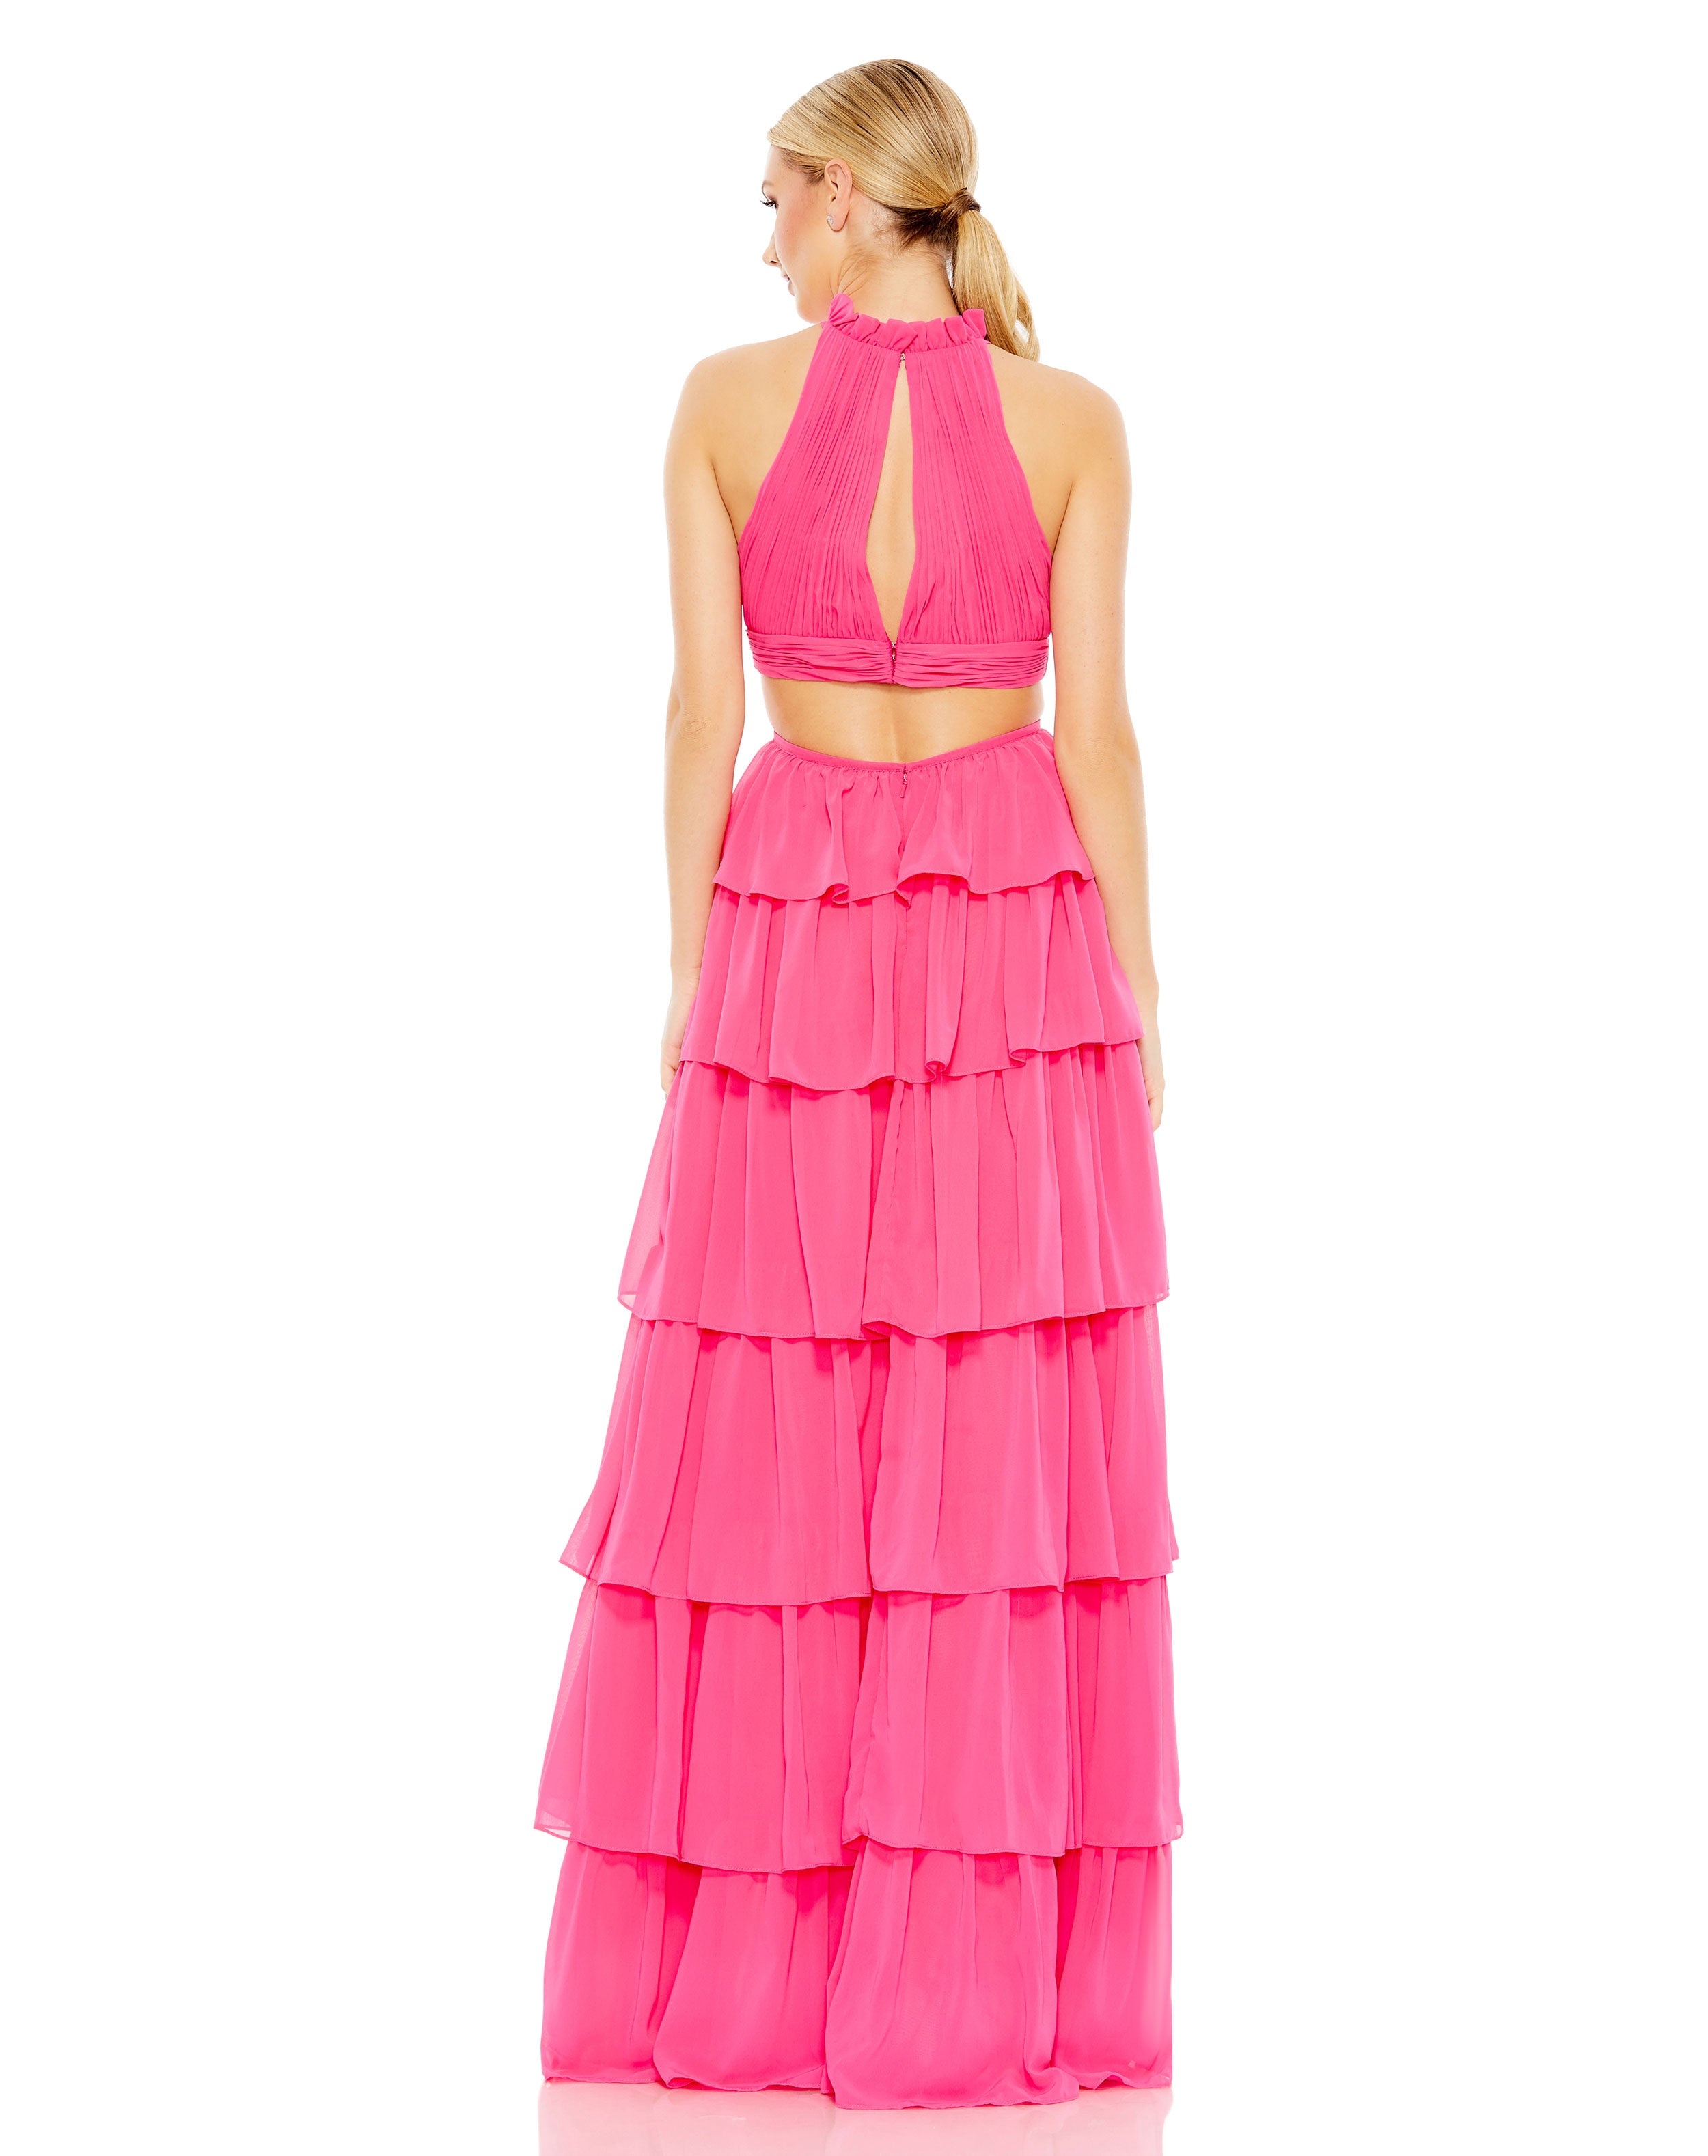 Tiered Ruffle Pleated High Neck Ball Gown